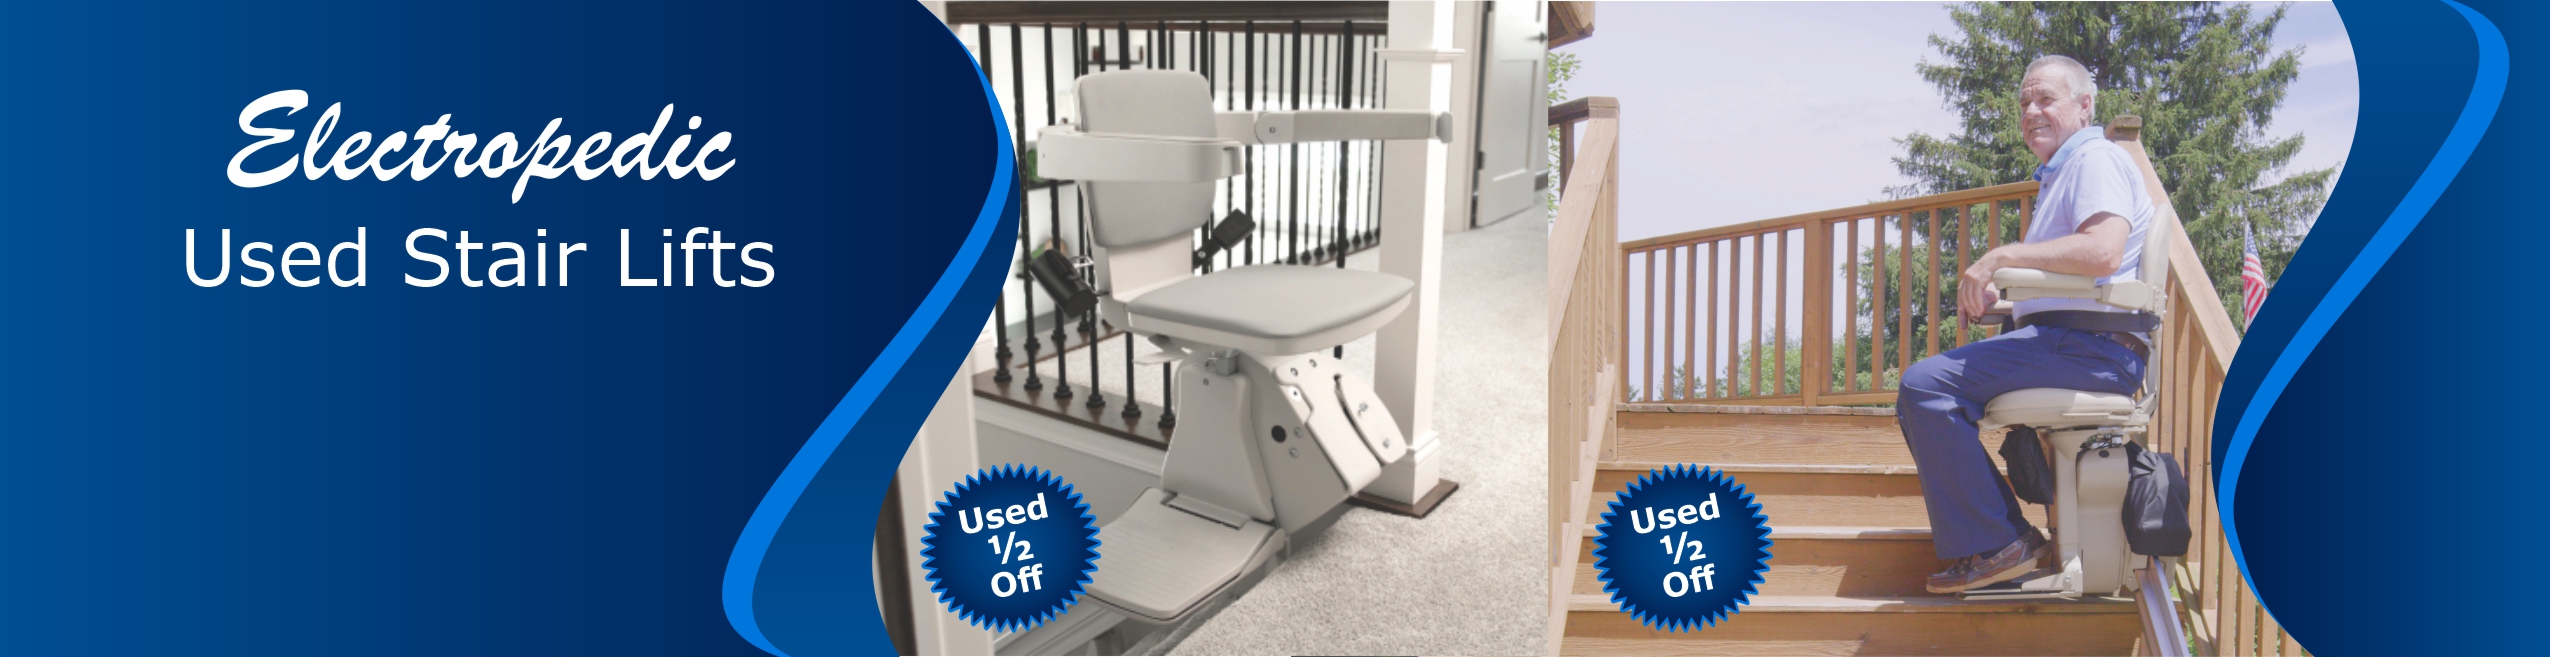 Used Stair Lifts ½ Off